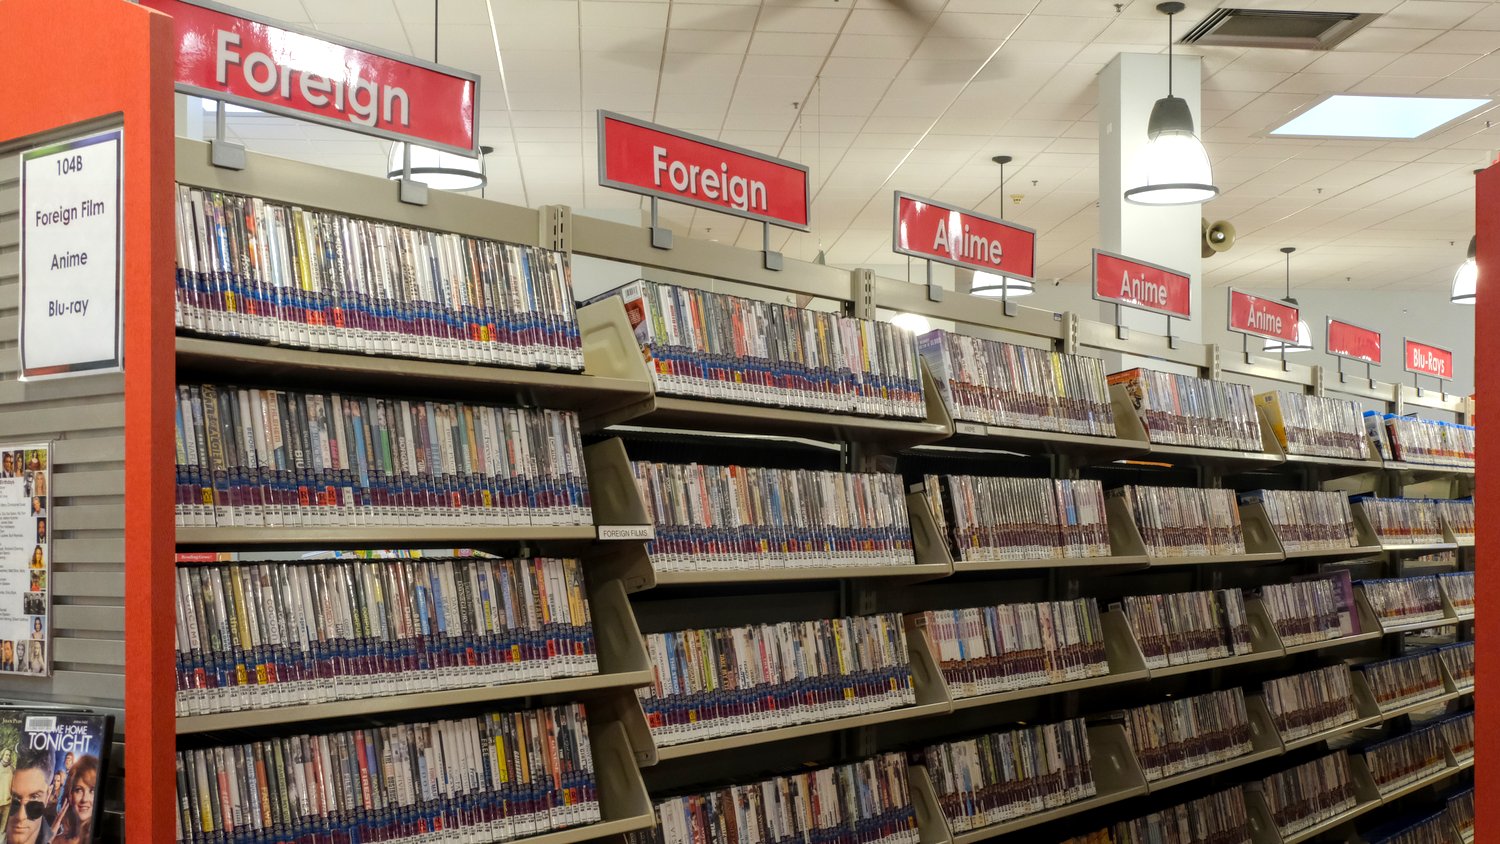 Foreign films, anime, and blu-ray selections.